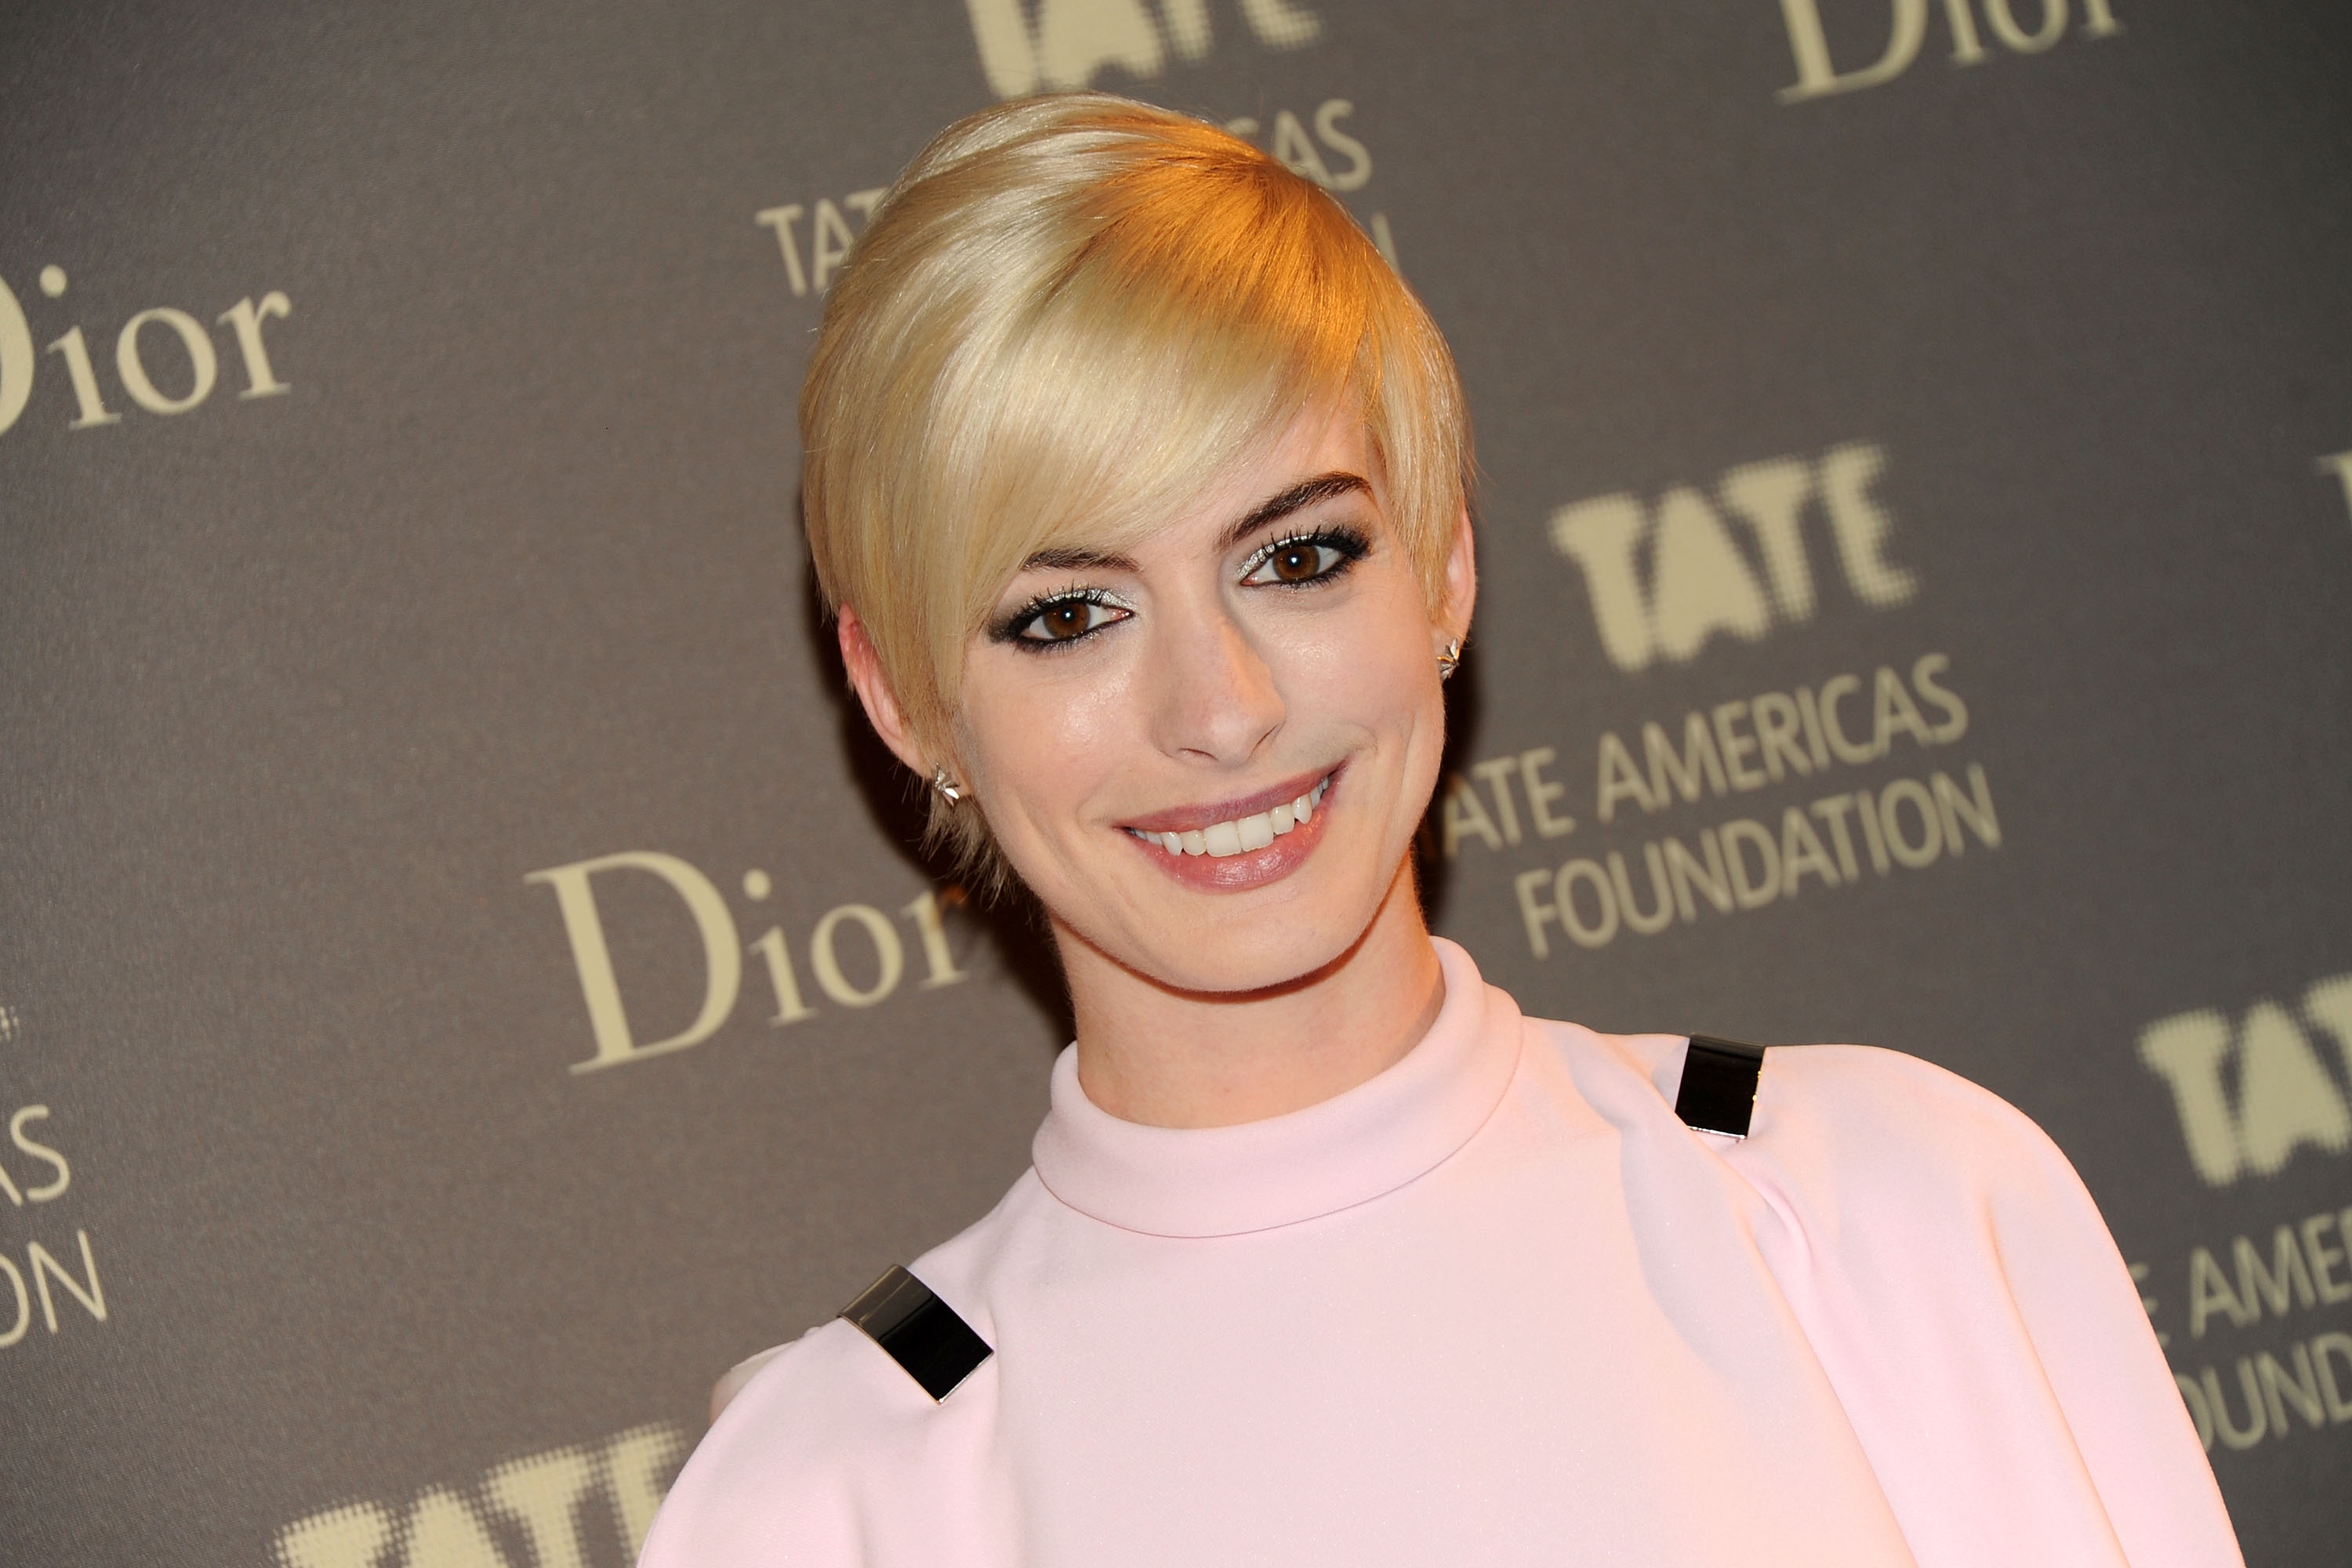 19 Brunette Celebrities Who Dyed Their Hair Blonde Which Look Is